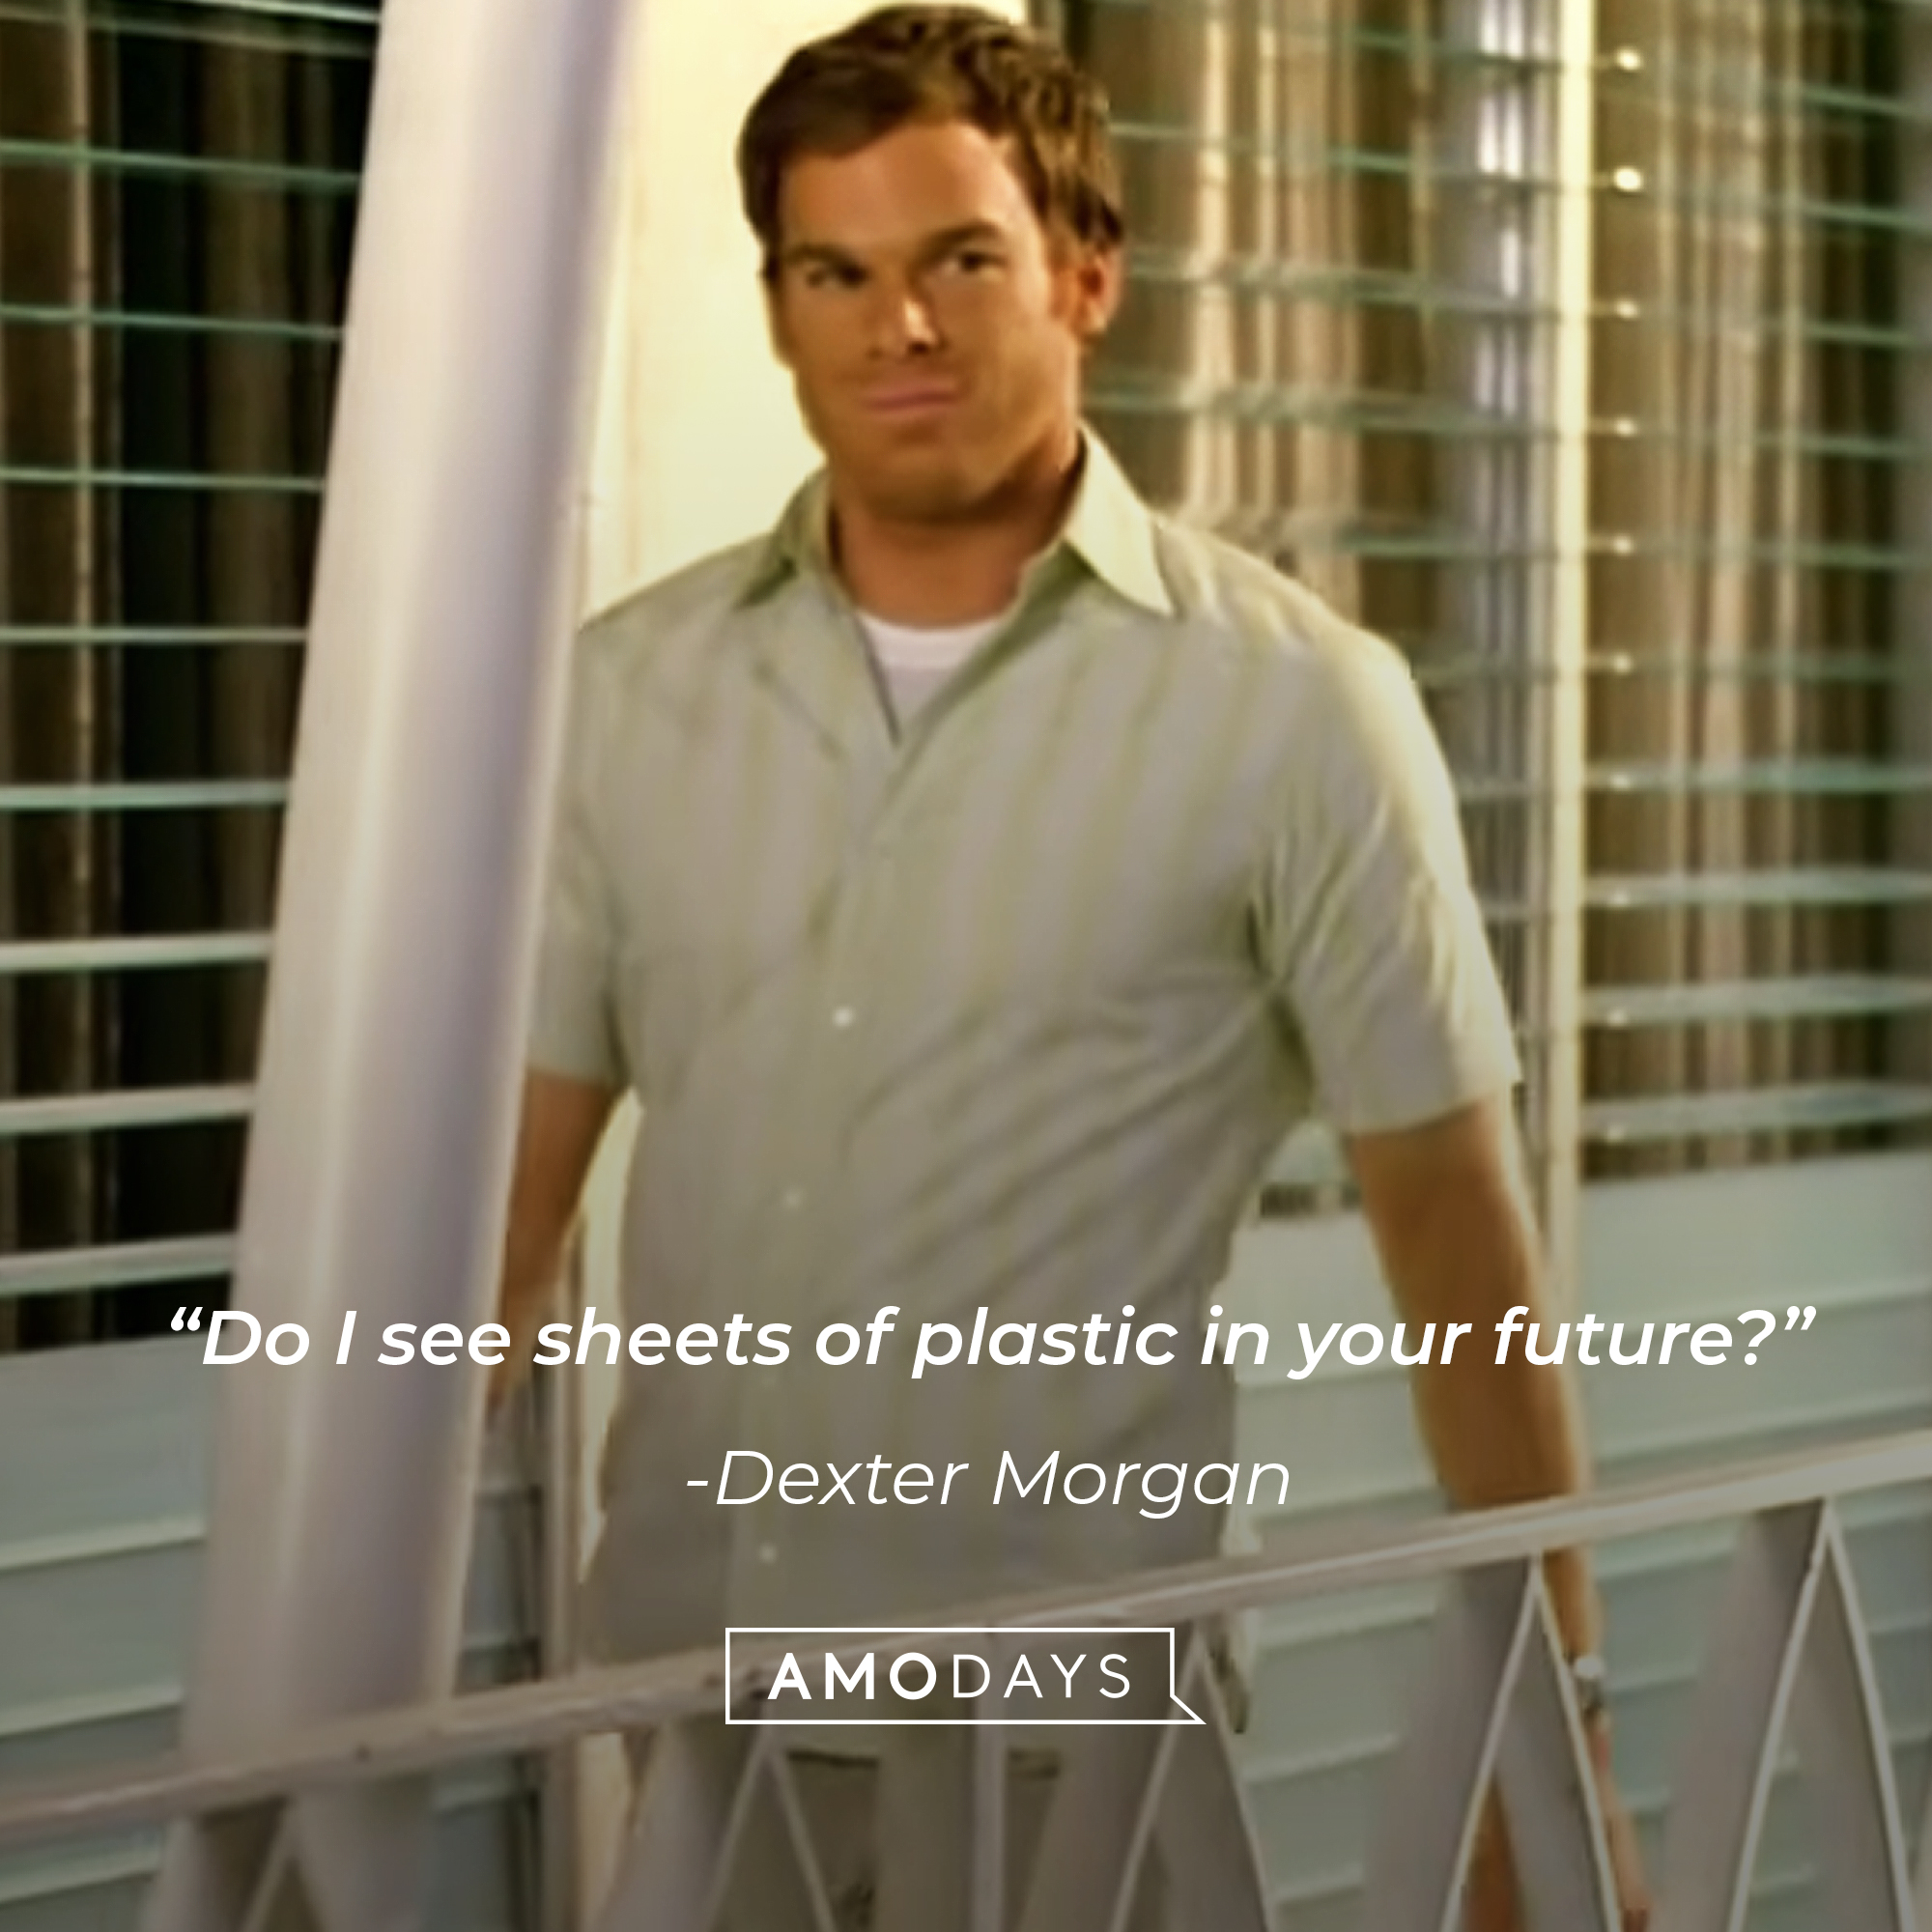 Dexter Morgan, with his quote: ”Do I see sheets of plastic in your future?” | Source: Showtime